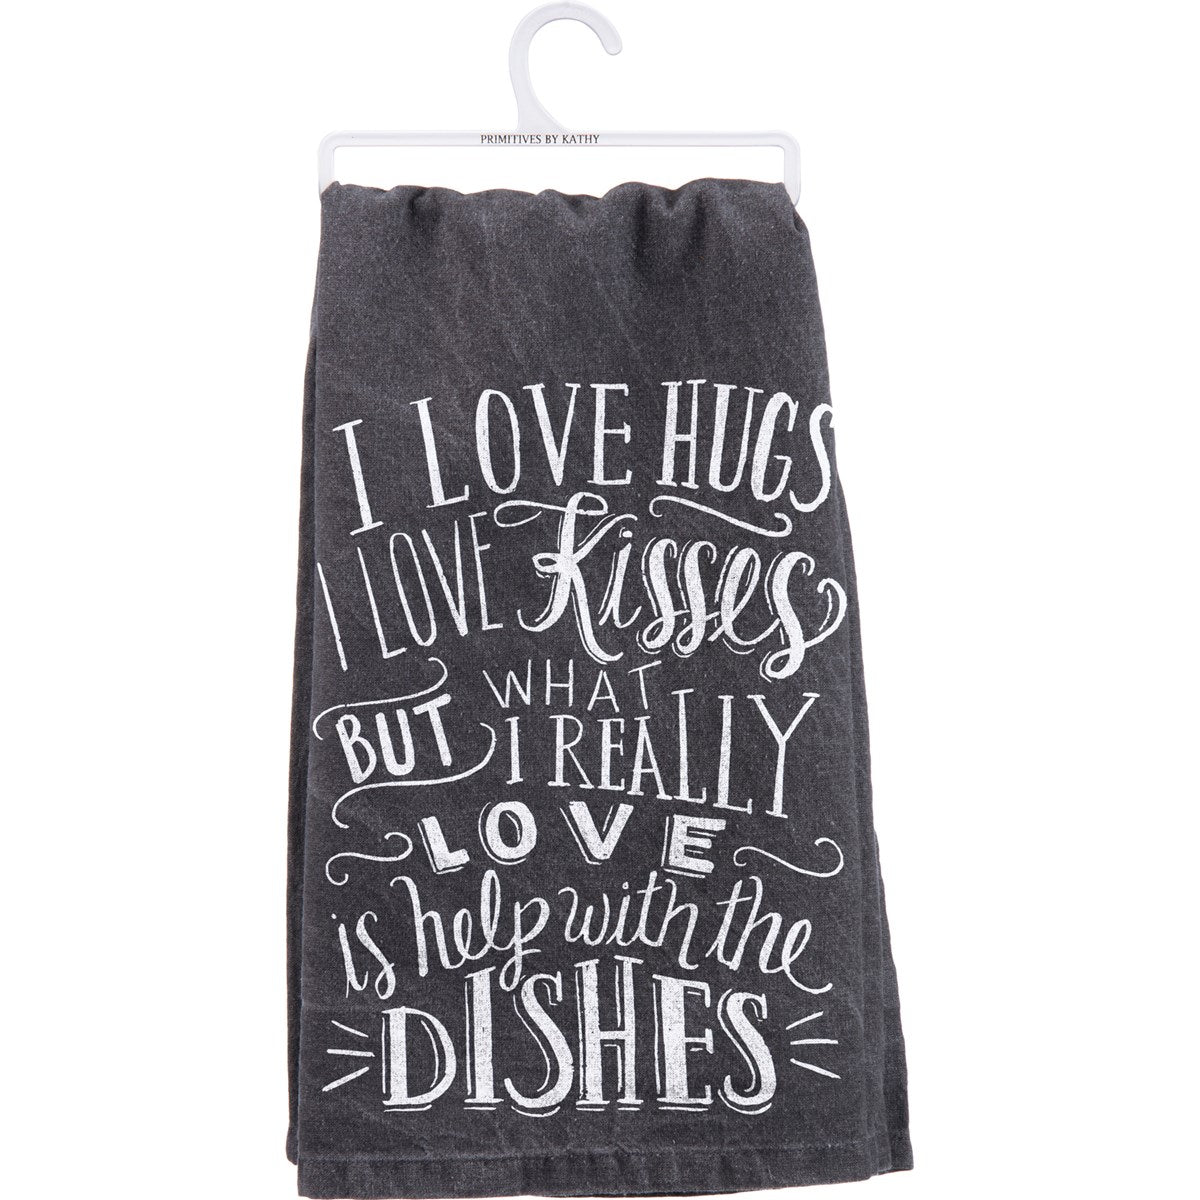 The Dishes Kitchen Towel